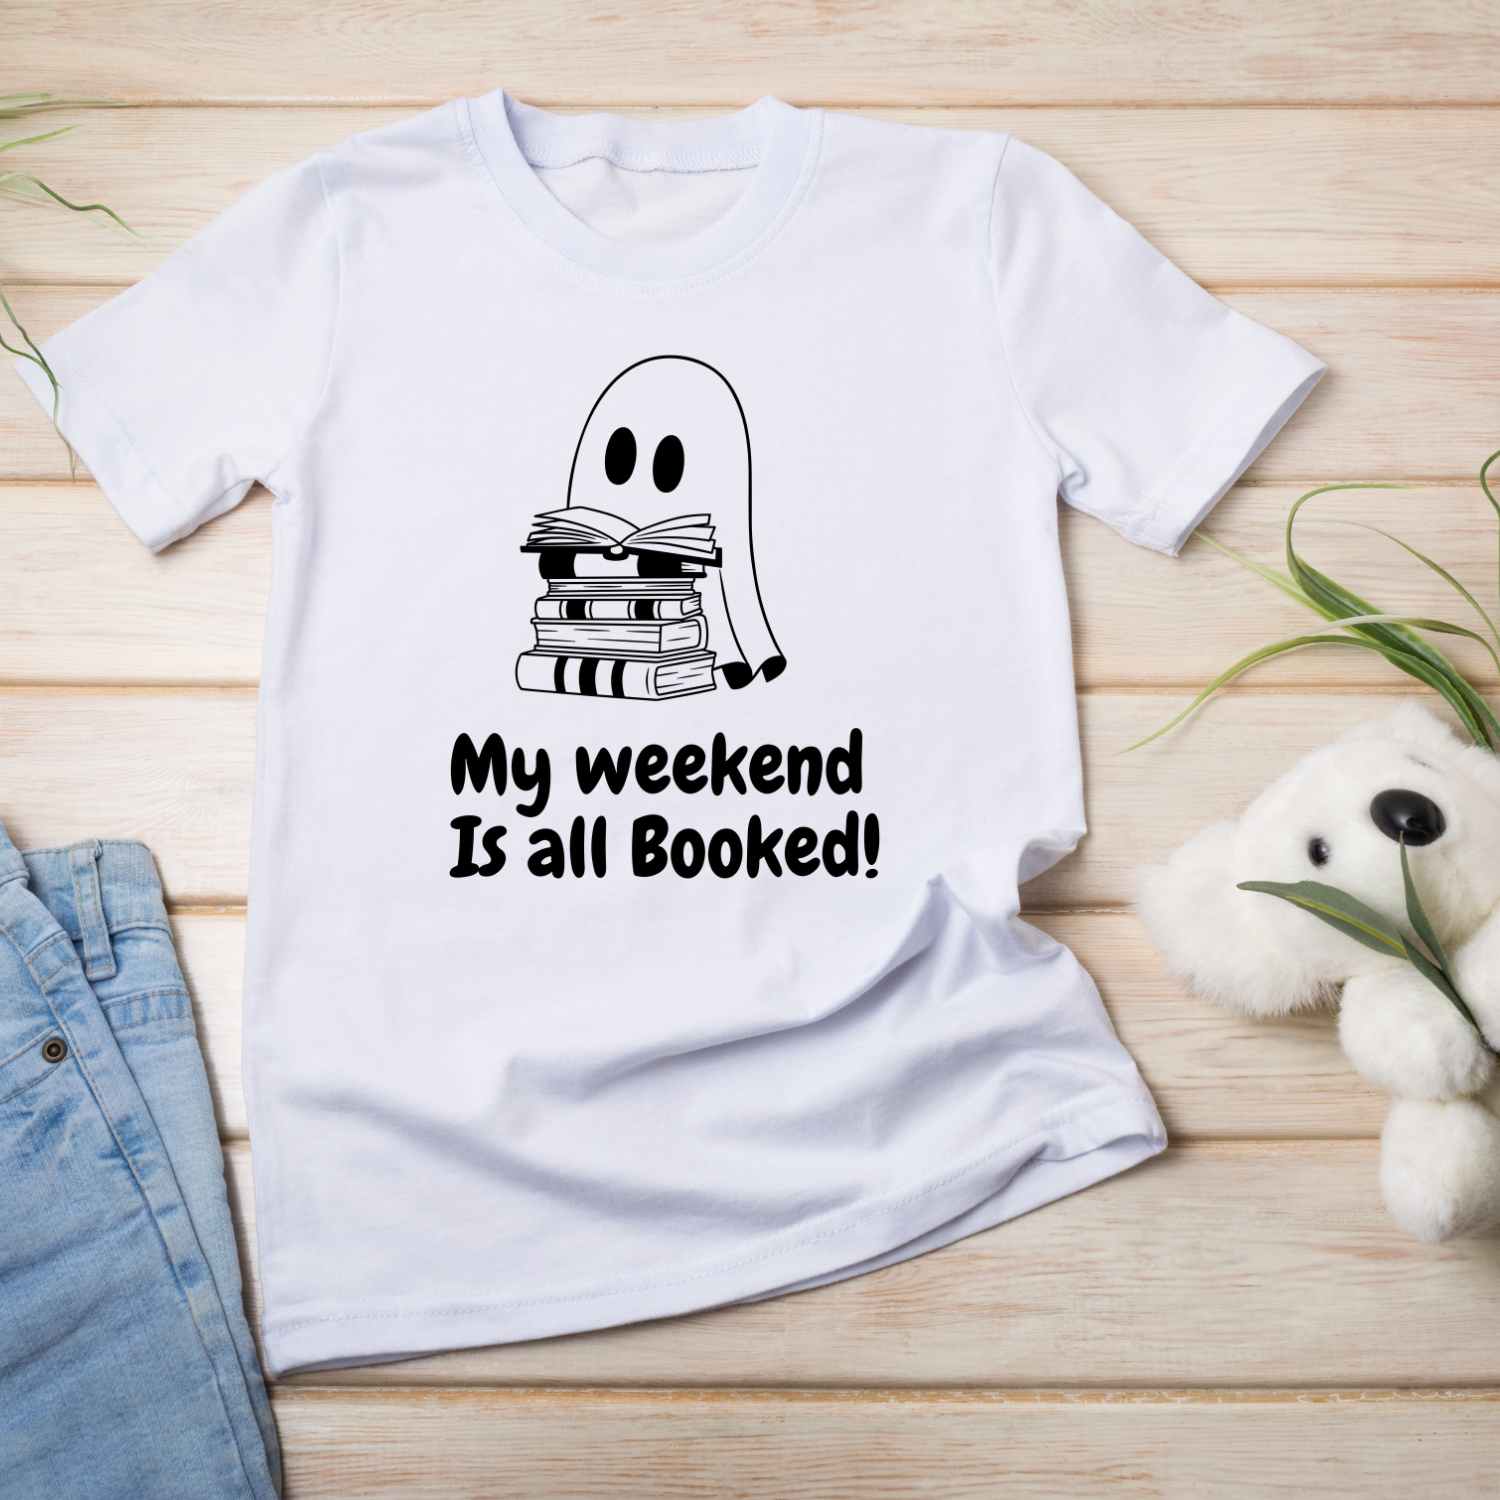 My weekend is all Booked T-shirt Design